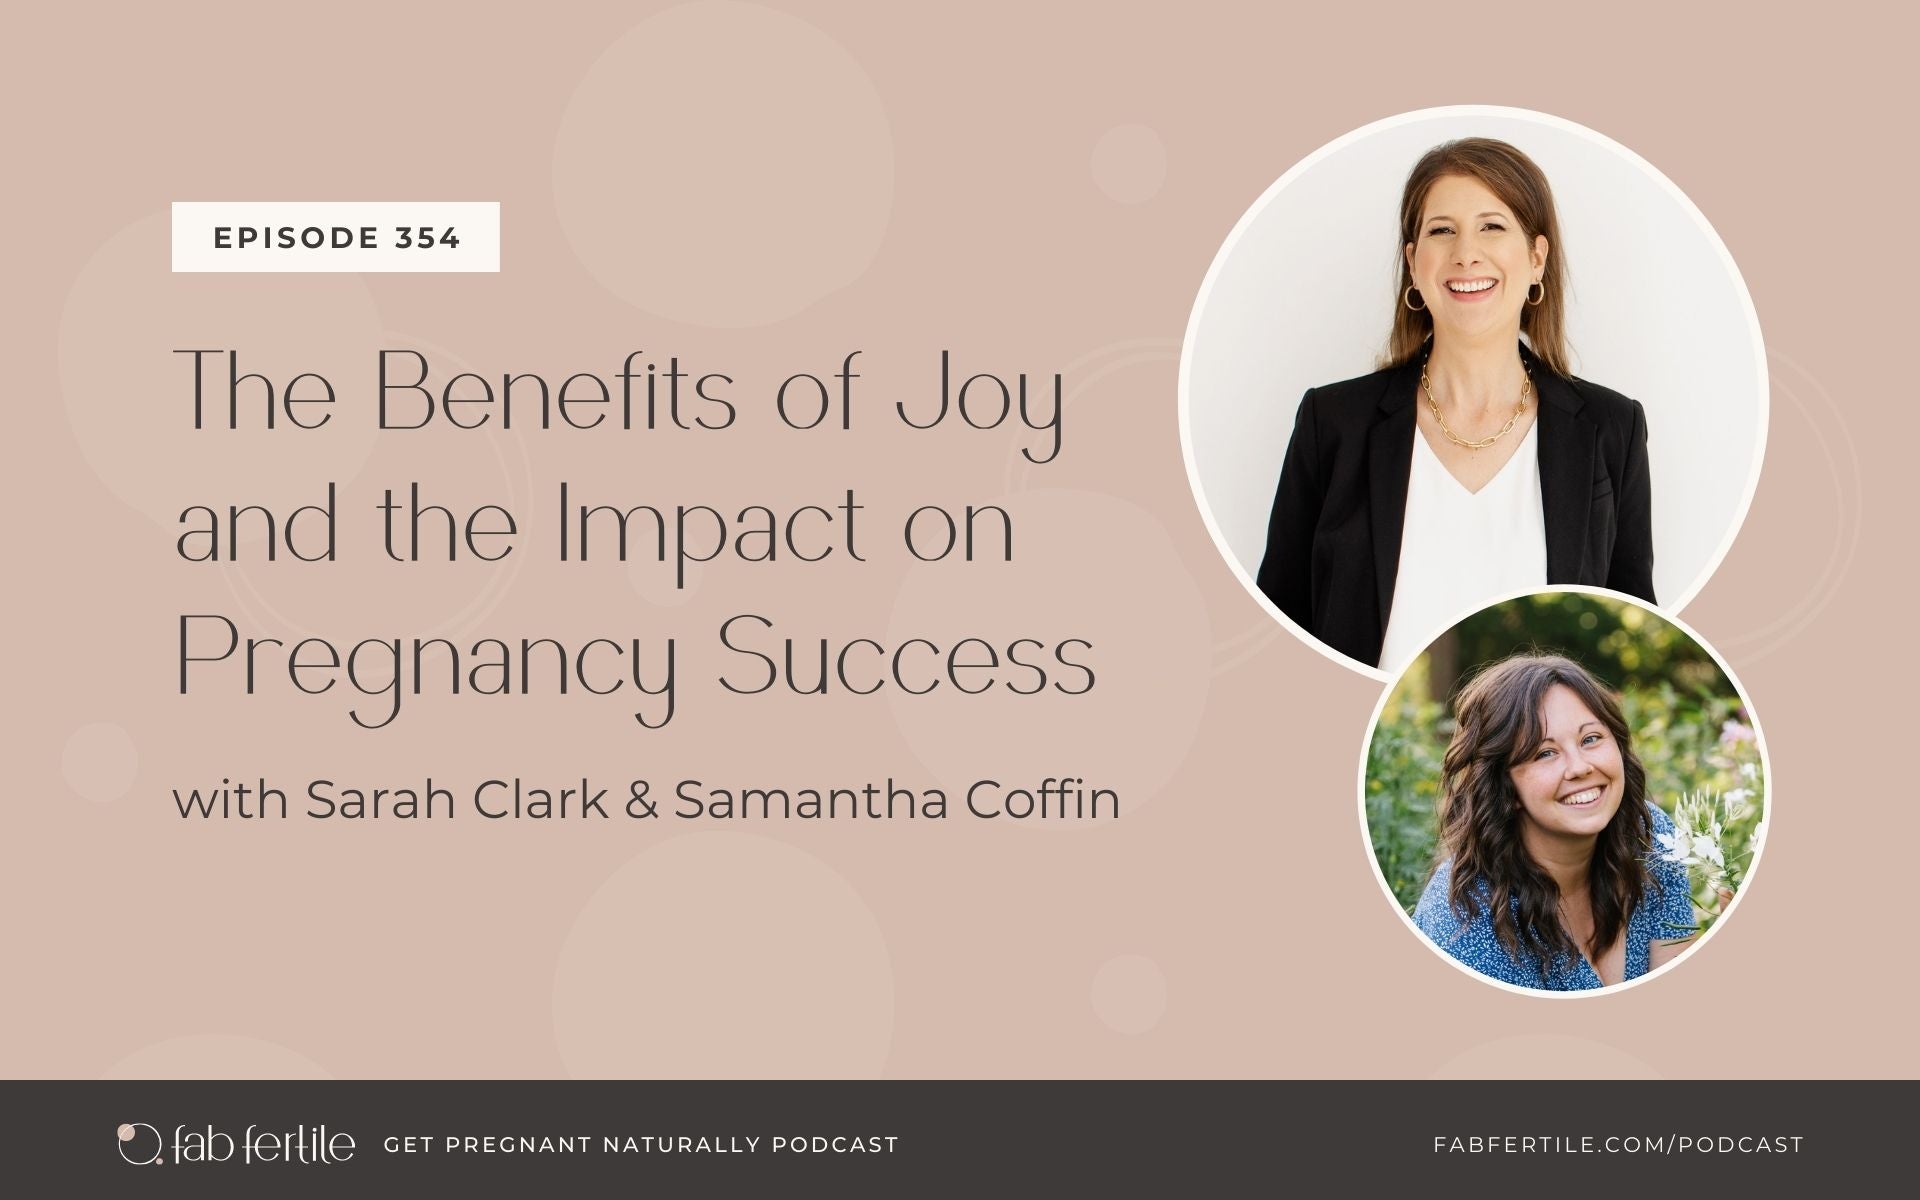 The Benefits of Joy and the Impact on Pregnancy Success